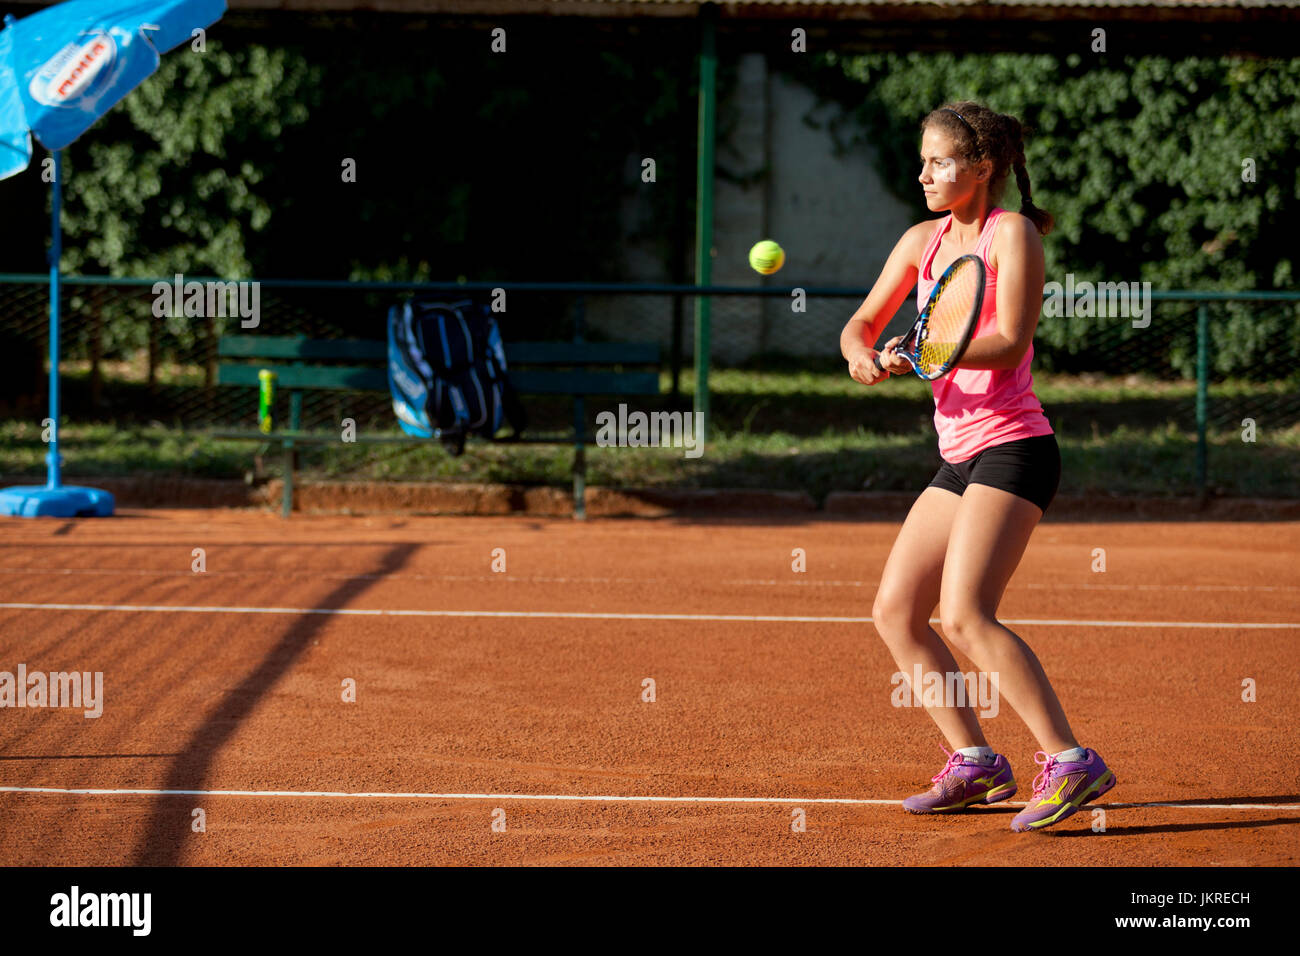 Young girl playing tennis on red clay court Stock Photo